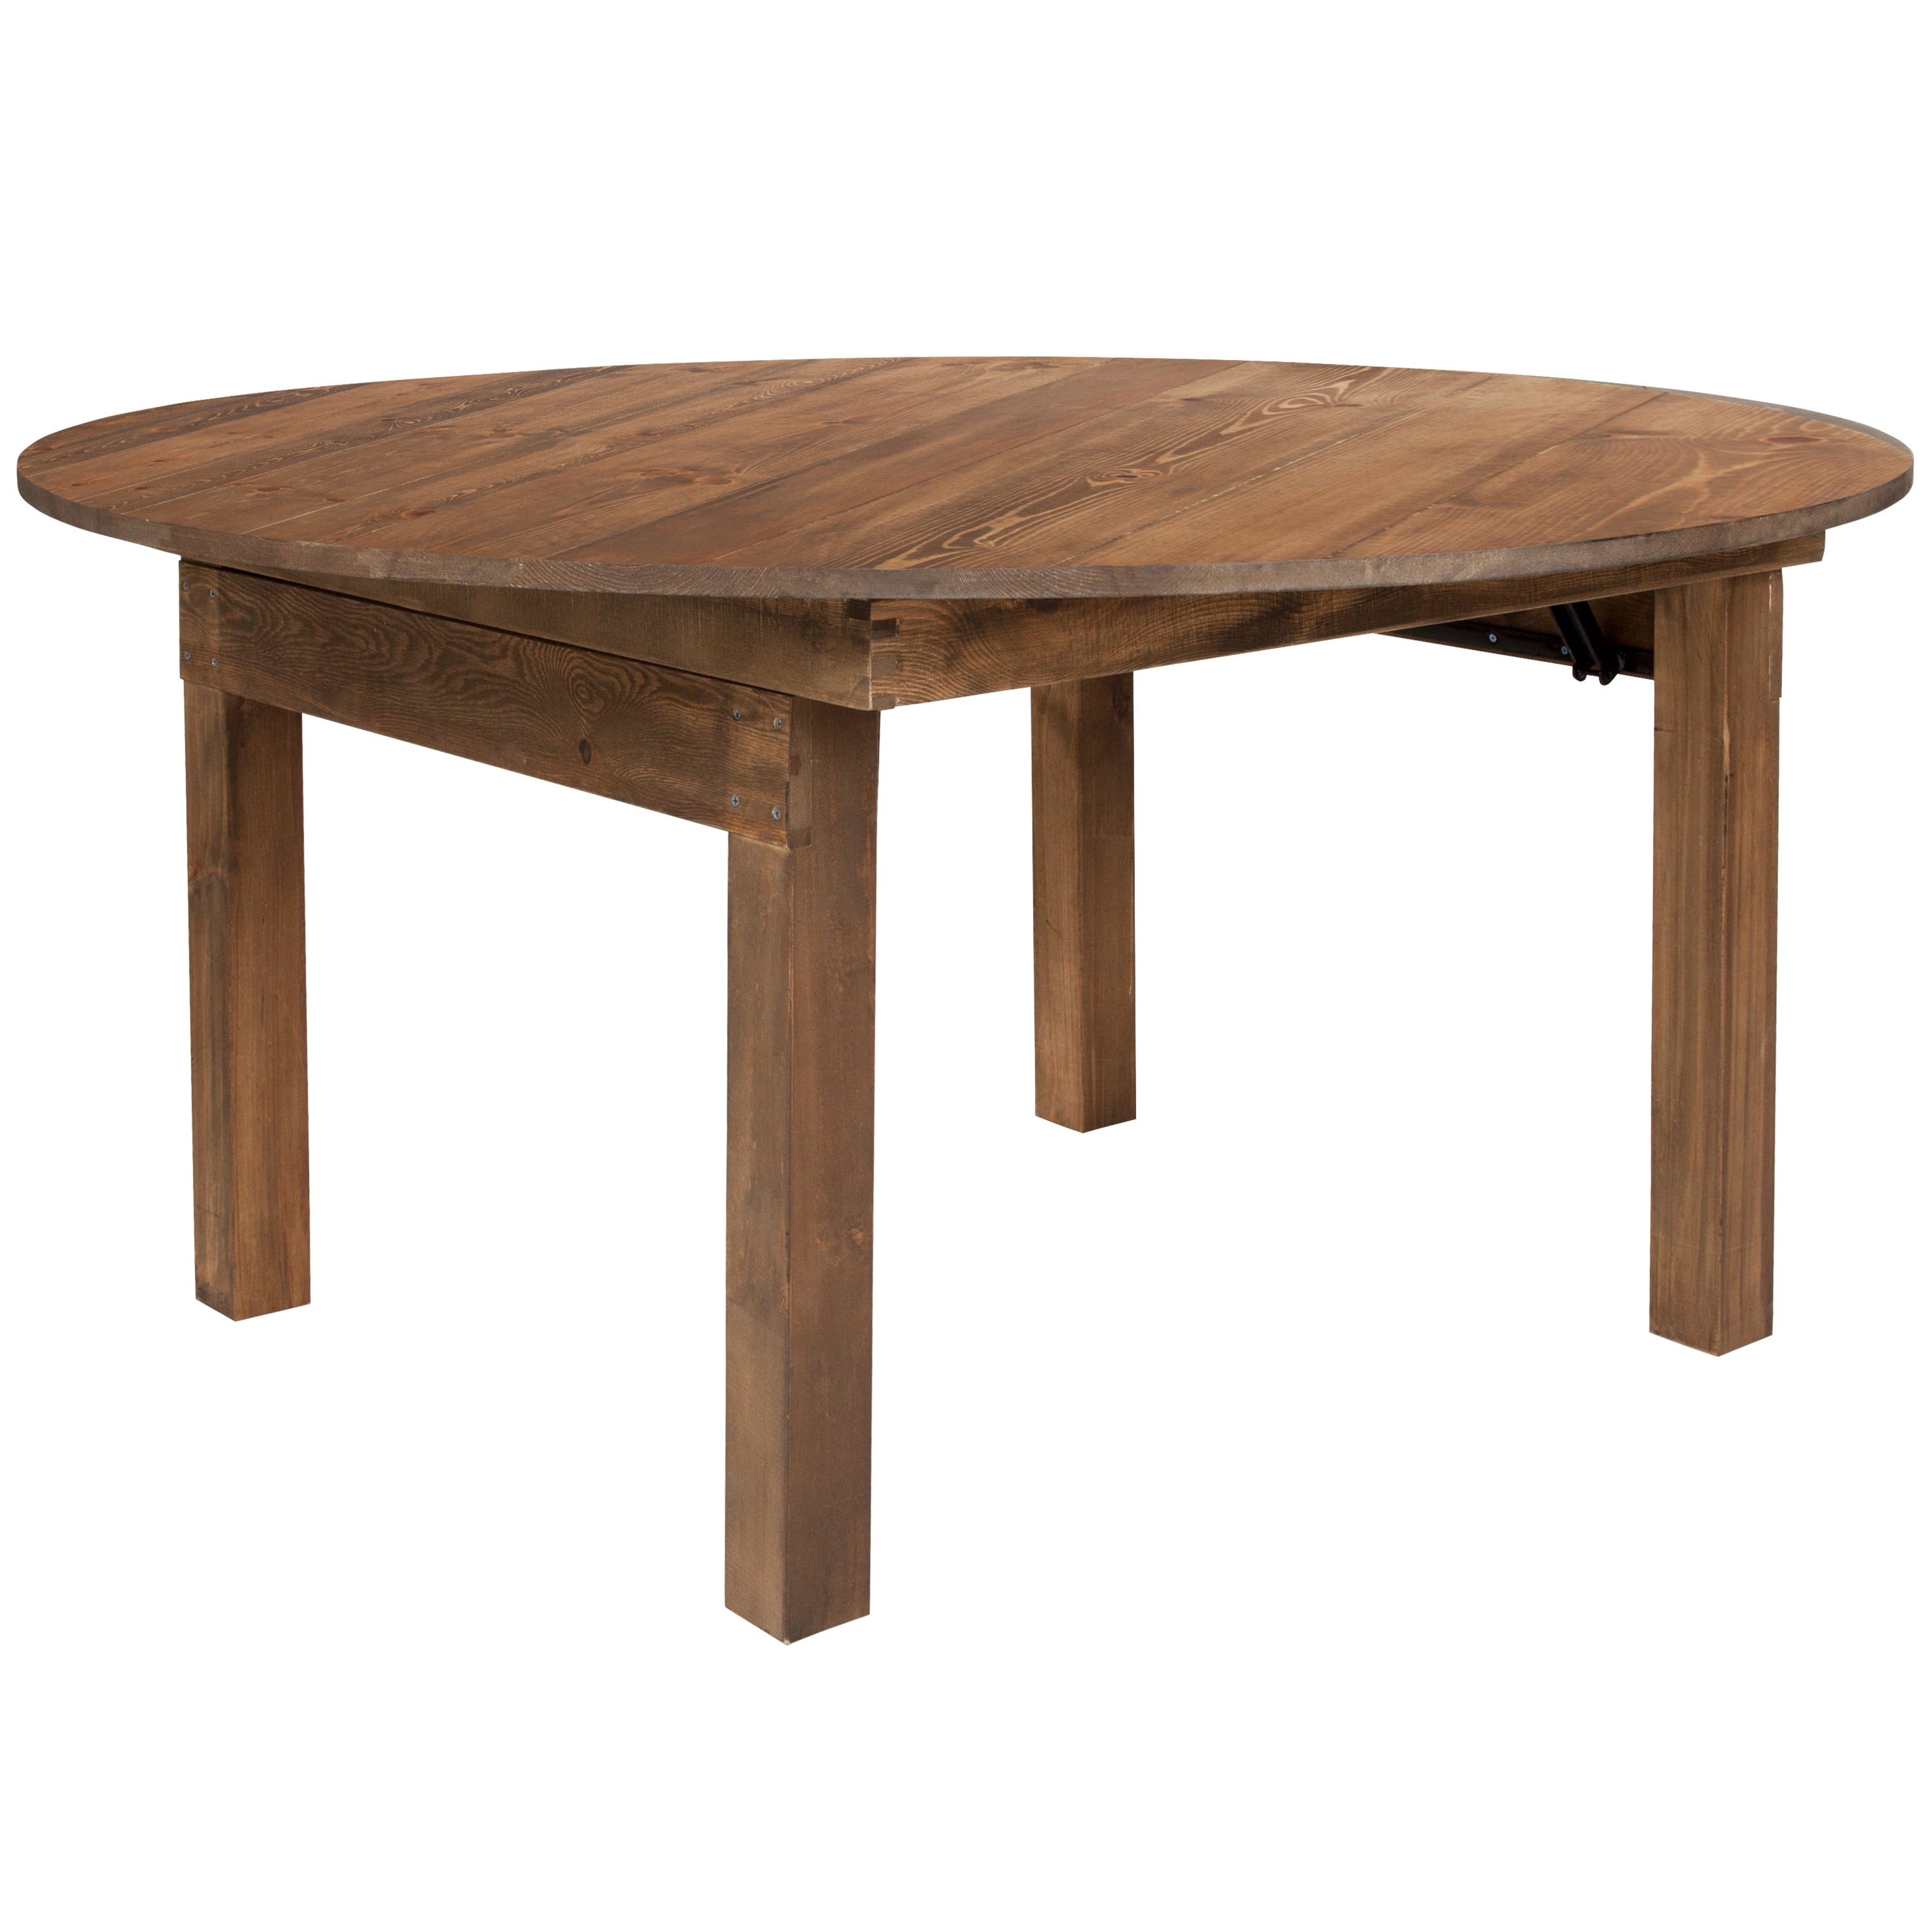 HERCULES Series Round Dining Table | Farm Inspired, Rustic & Antique Pine Dining Room Table-Farm Table-Flash Furniture-Wall2Wall Furnishings